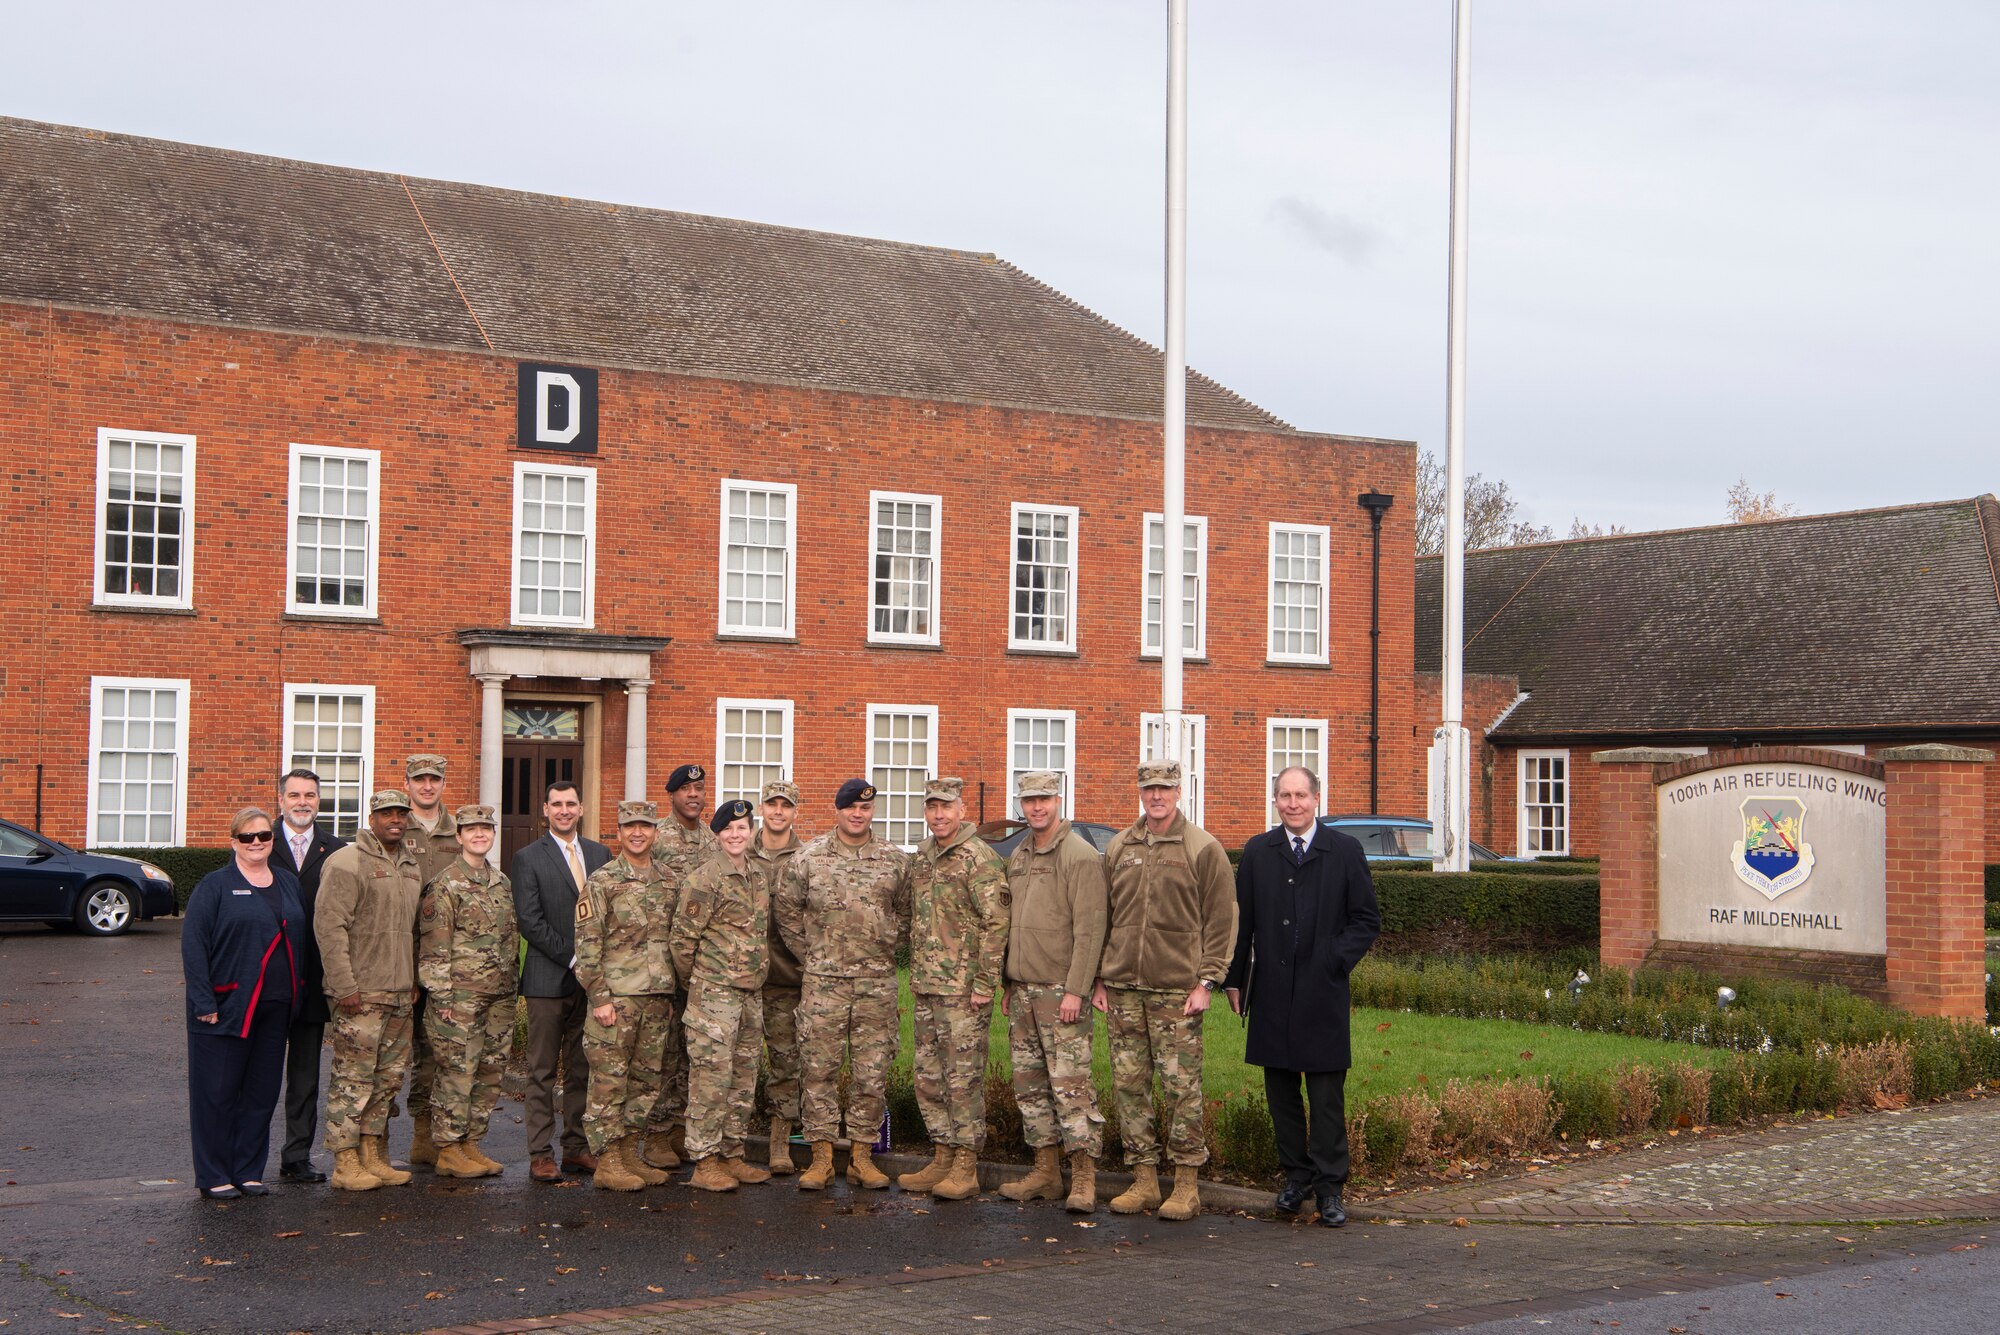 Members of the 100th Air Refueling Wing pose for a photo in front of the wing headquarters with Maj. Gen. John Wilcox, Air Force Installation and Mission Support Center commander, and Chief Master Sgt. Edwin Ludwigsen, AFIMSC command chief master sergeant, Nov. 22, 2019, at RAF Mildenhall, England. The AFIMSC provides installation and mission support that enables Team Mildenhall to complete its varied mission sets. (U.S. Air Force photo by Airman 1st Class Joseph Barron)